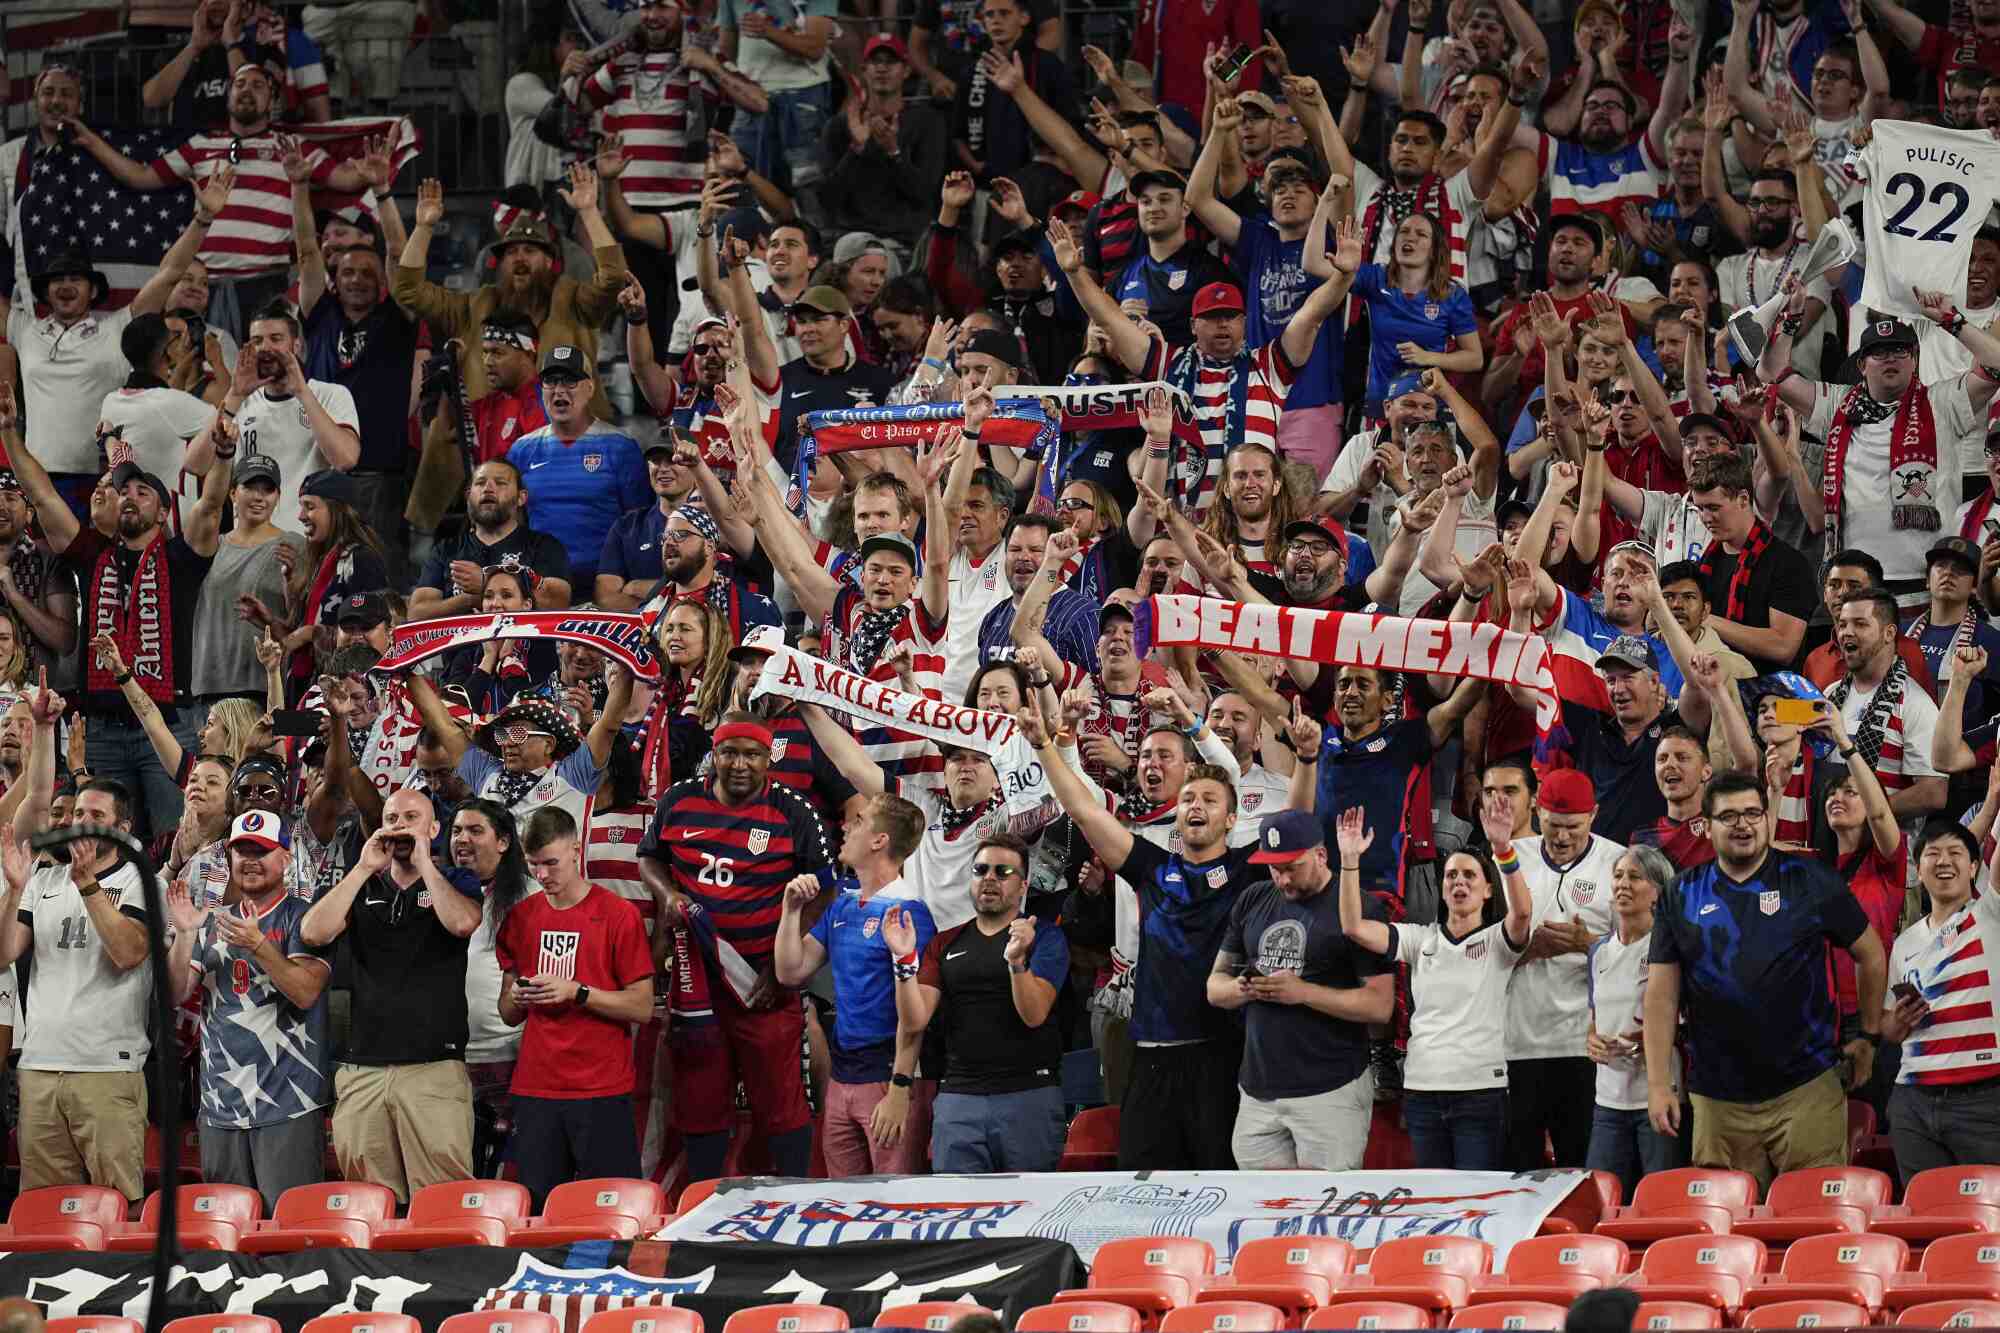 United States soccer fans cheer following the team's win over Mexico in the CONCACAF Nations League championship 